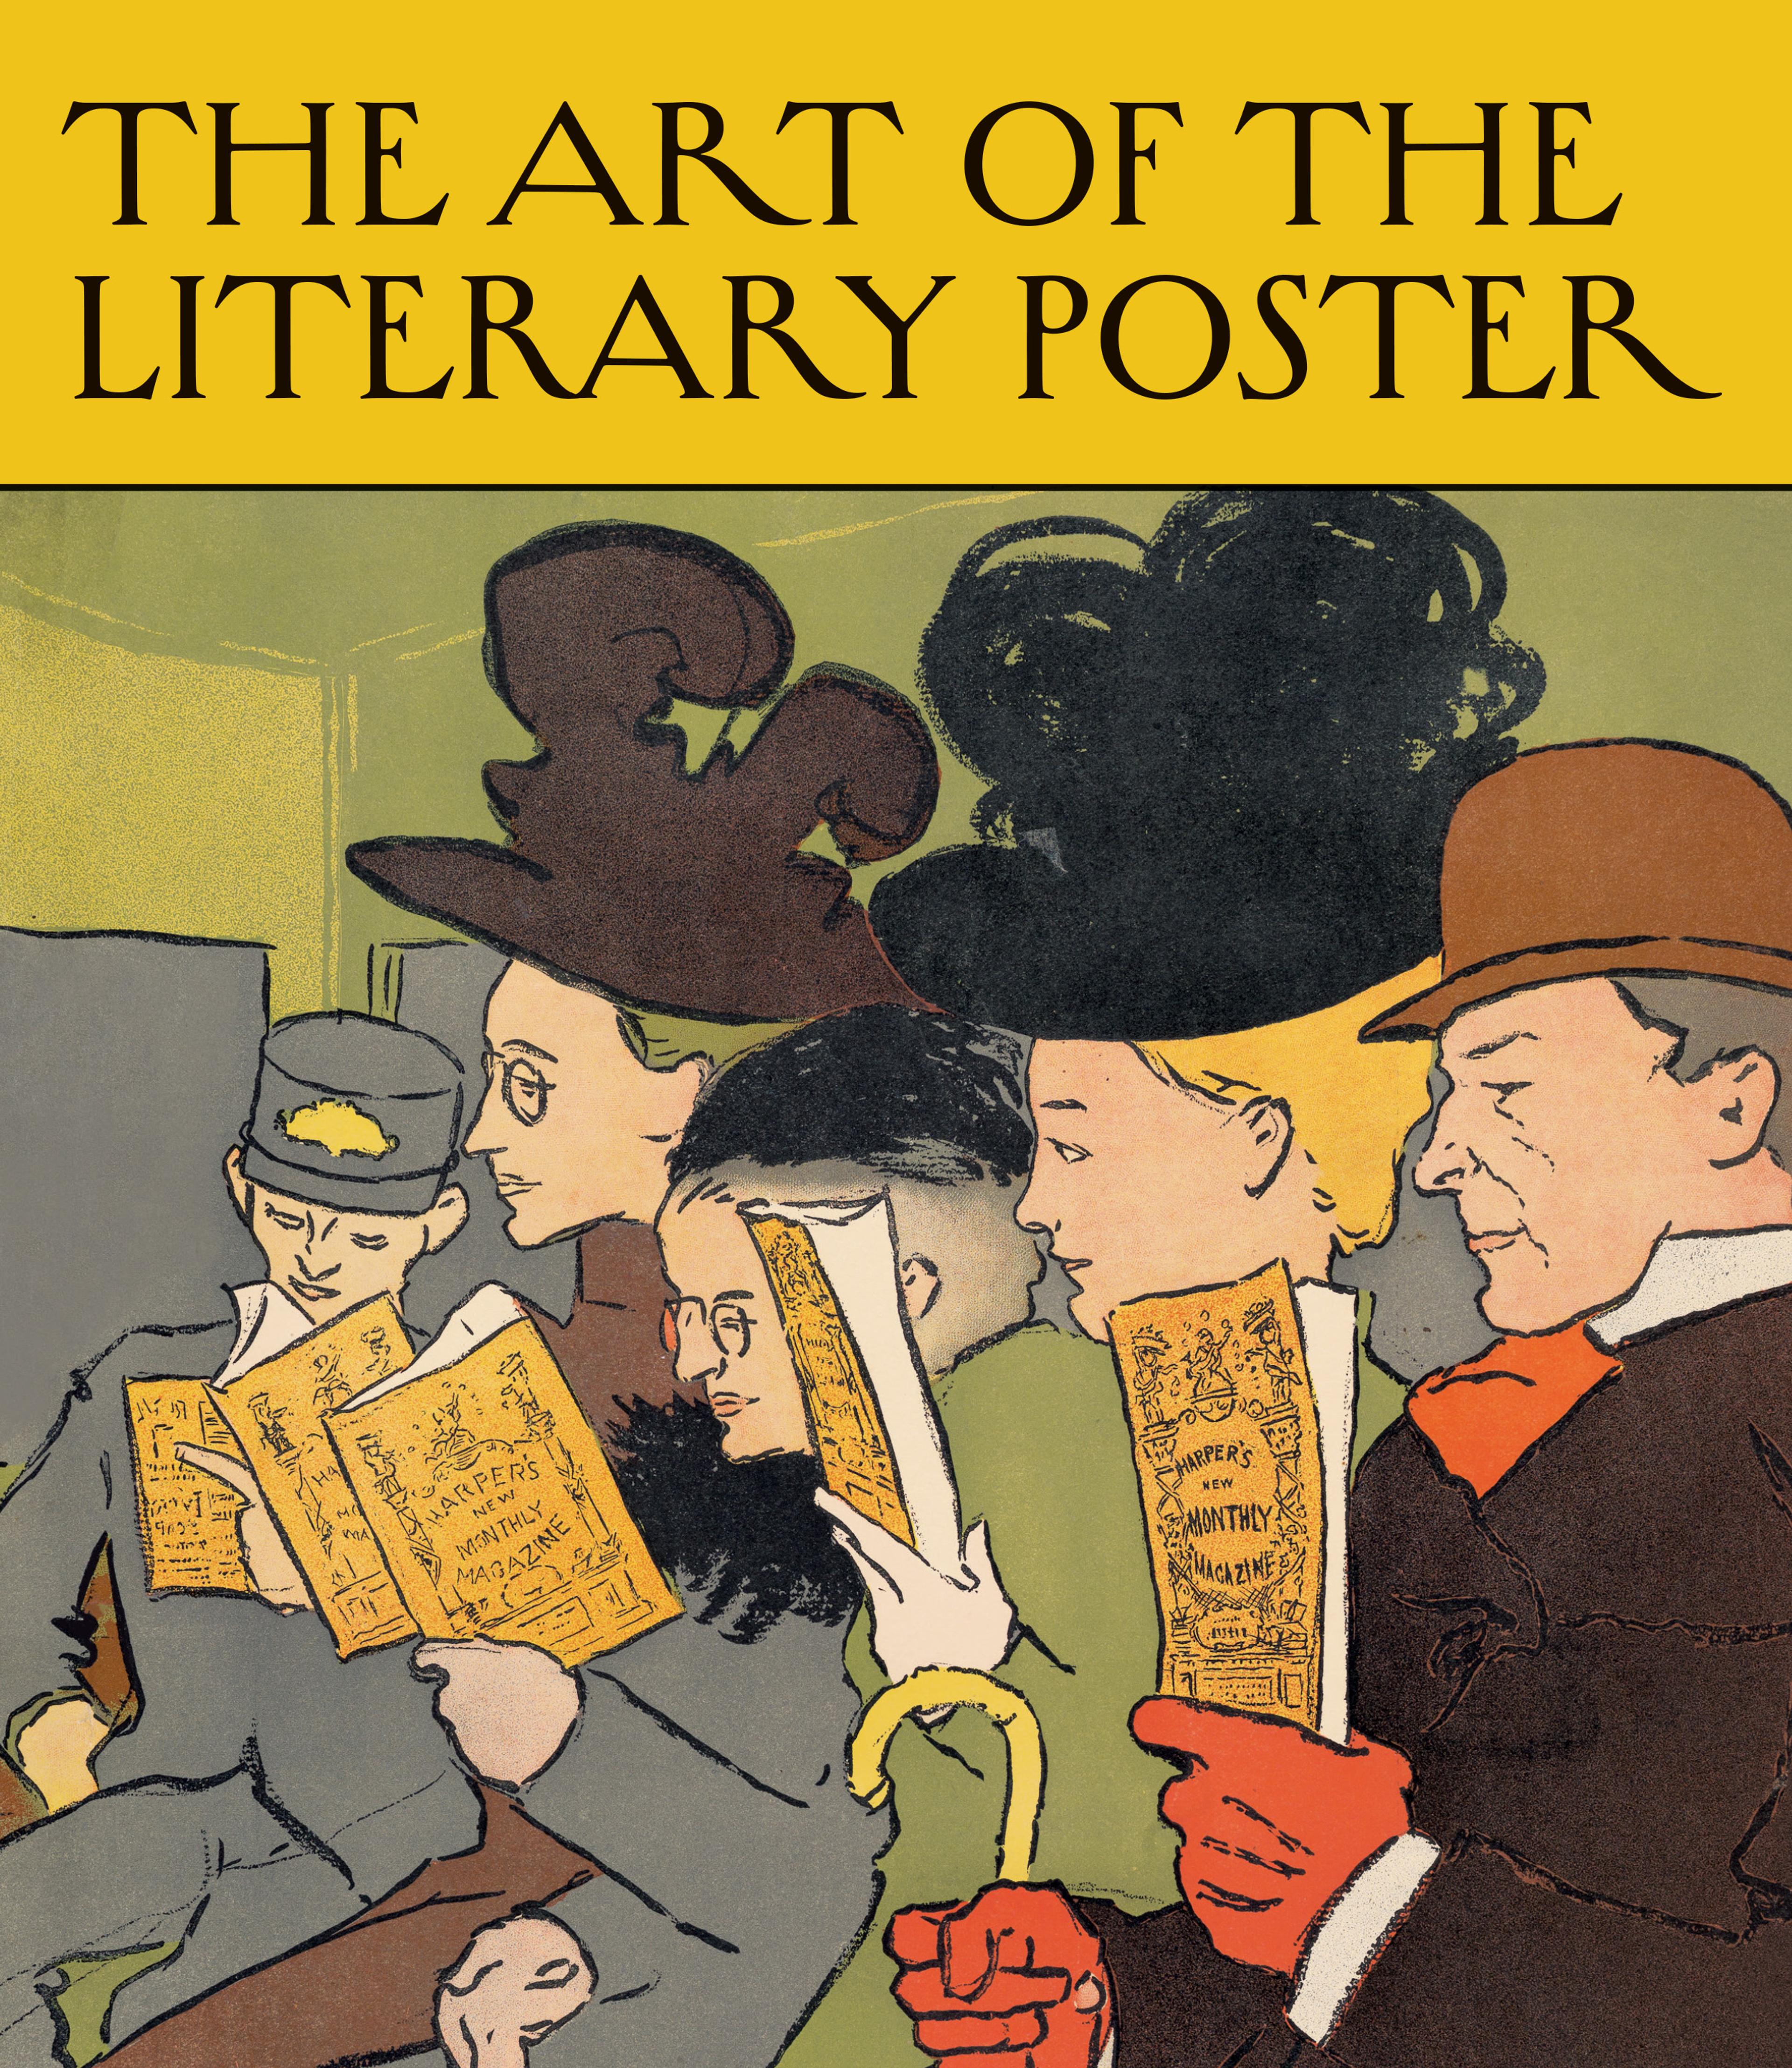 several figures in early-twentieth-century dress, including women with large hats, reading the same issue of a magazine